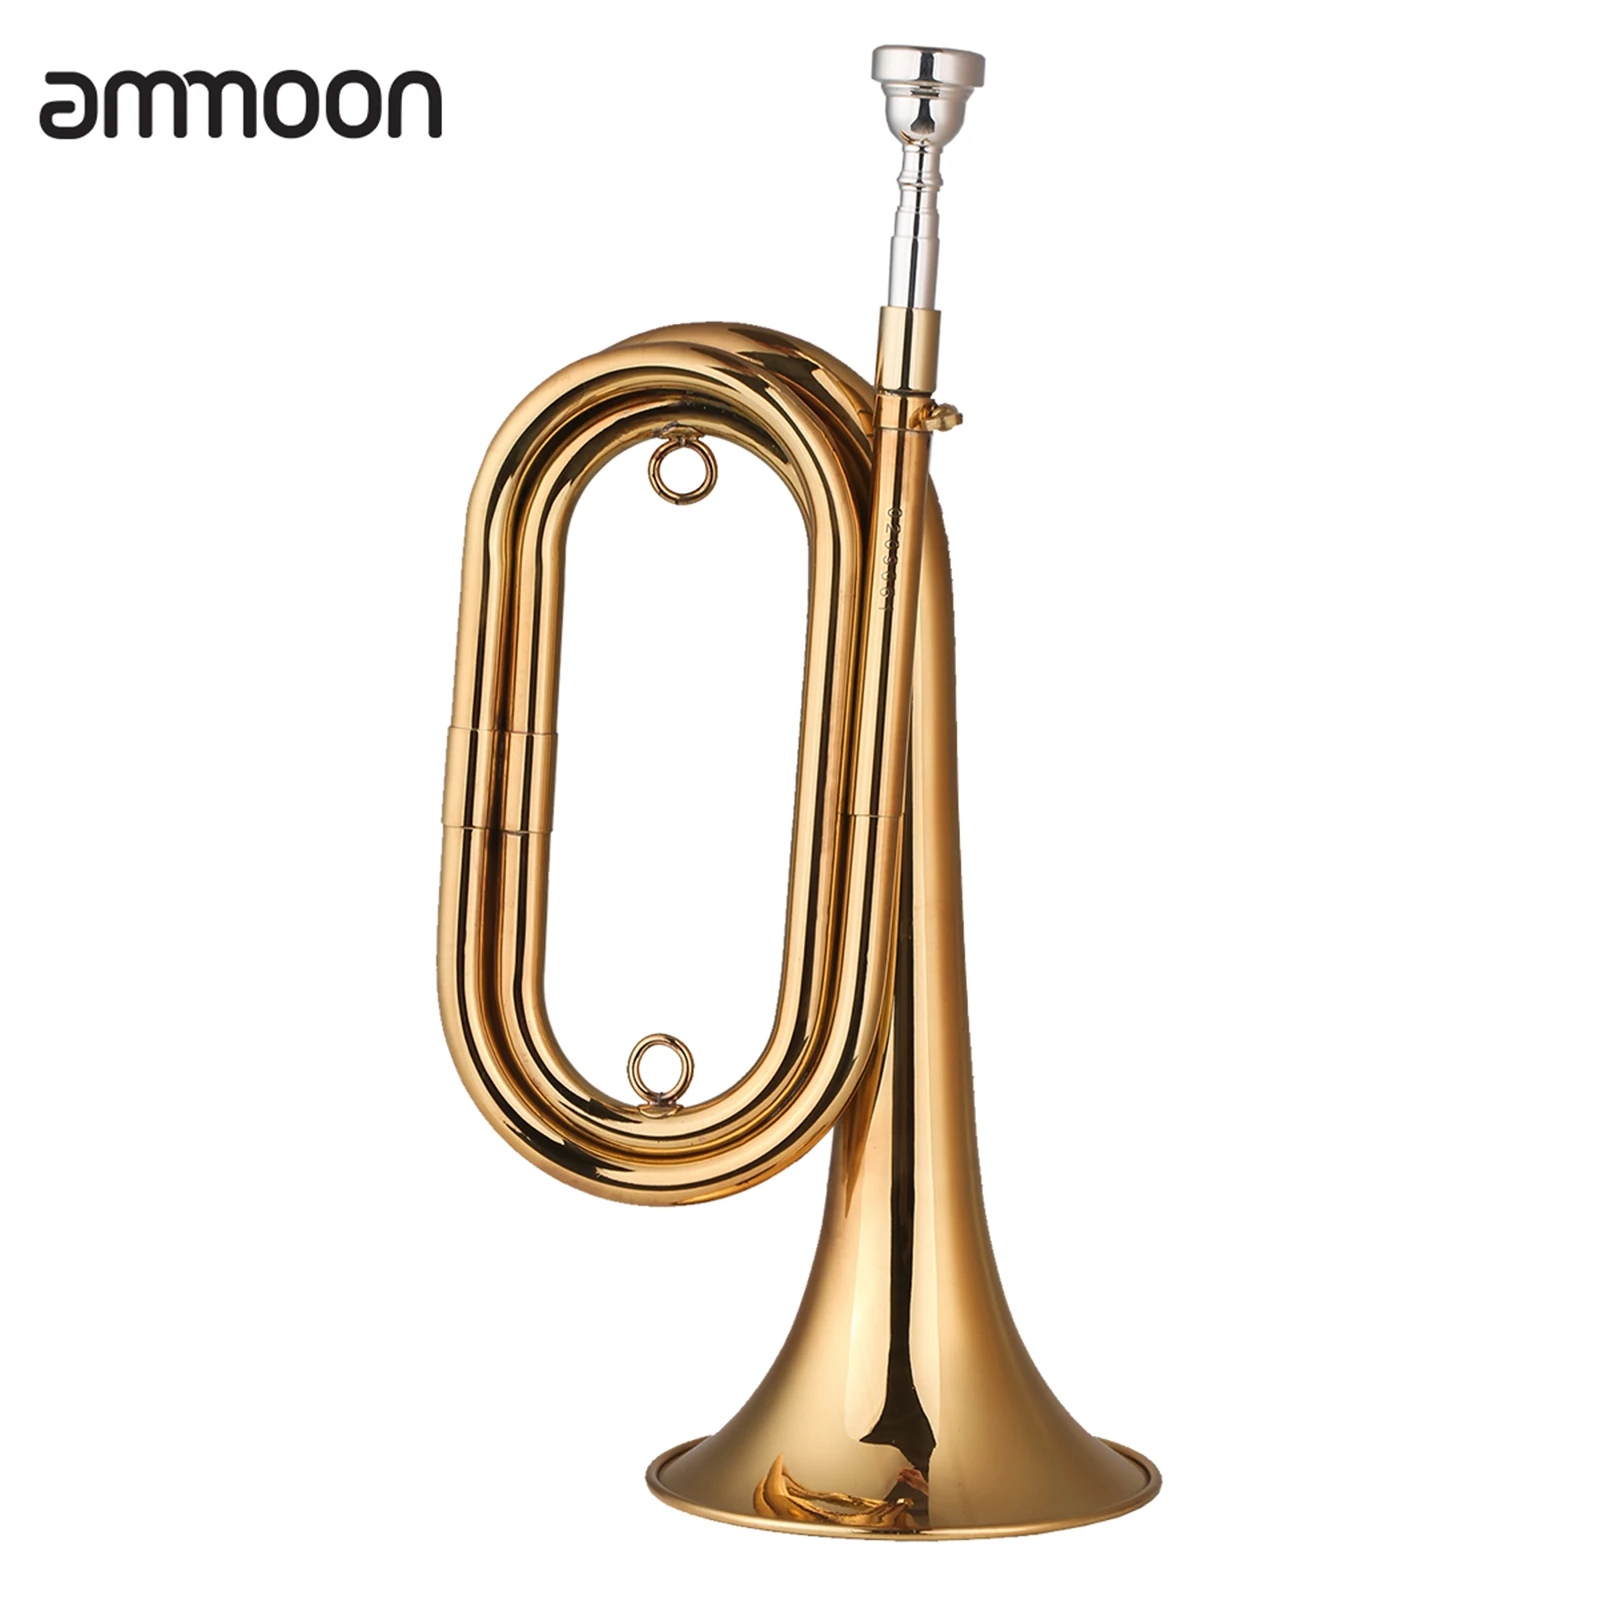 

ammoon Brass Bugle Call Gold-Plated Trumpet Cavalry Horn for Beginner Band play with Mouthpiece Carrying Bag Musical Instrument